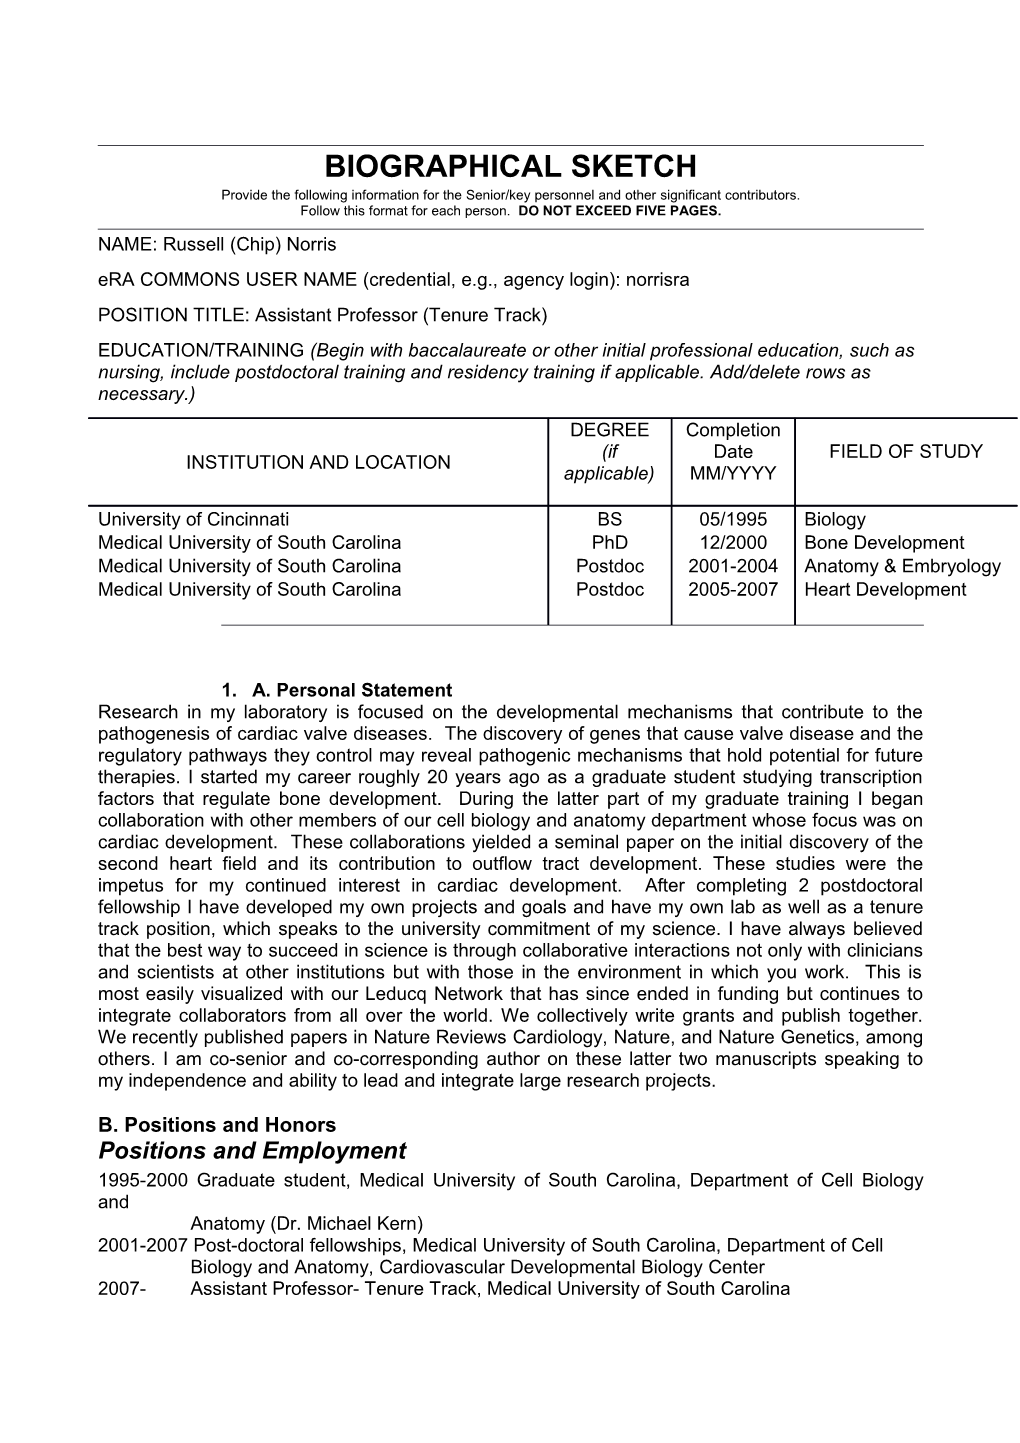 OMB No. 0925-0046, Biographical Sketch Format Page s1